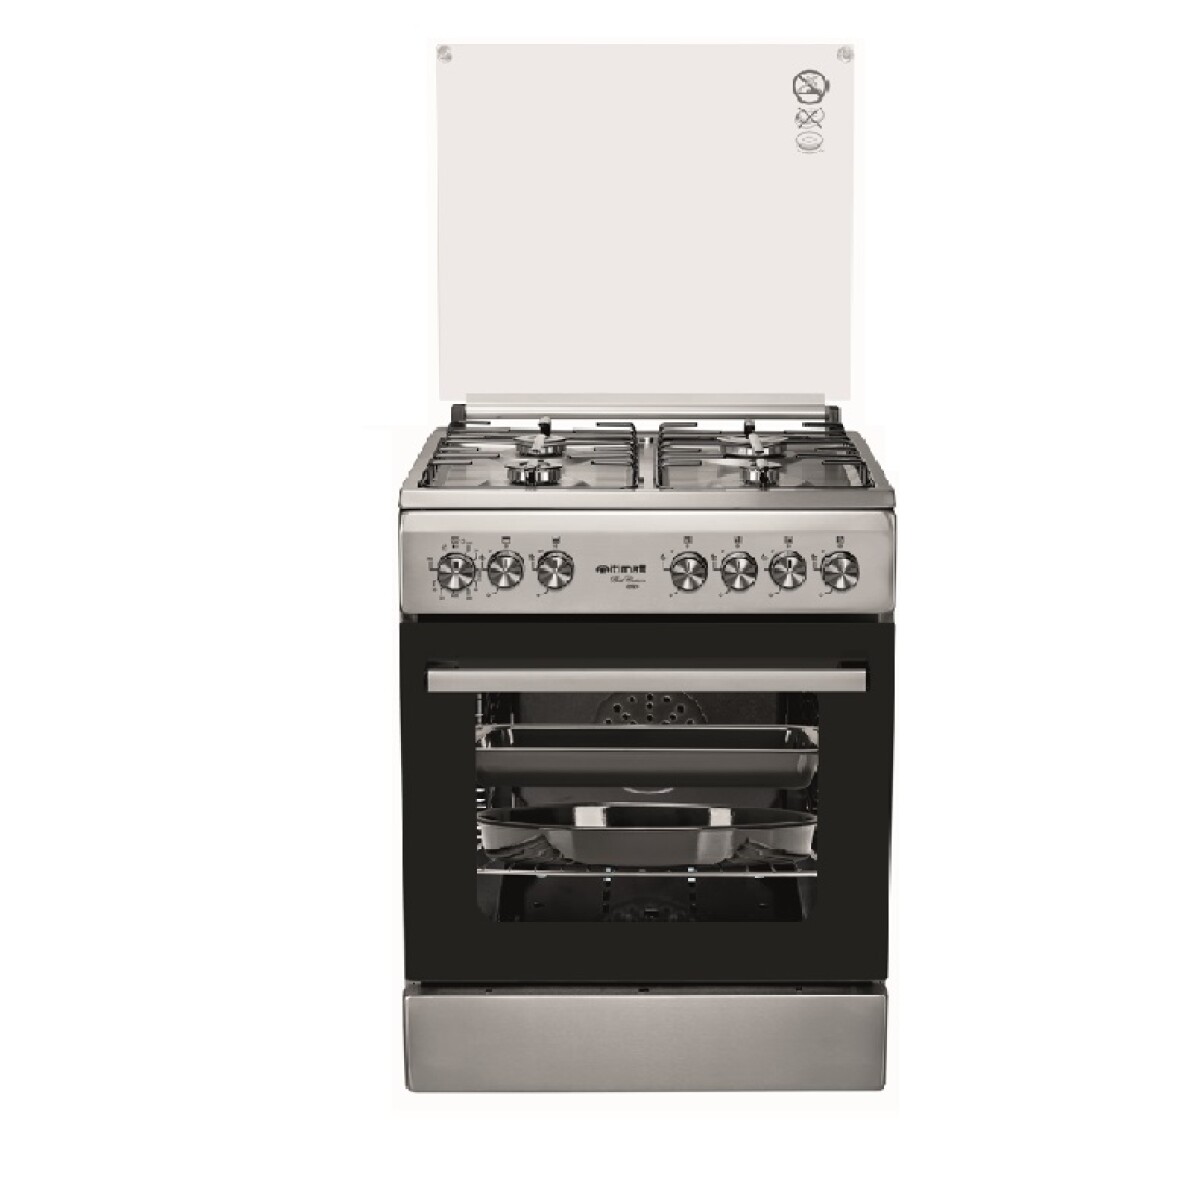 Cocina FullGas Grill a gas ITIMAT Inoxidable. - 001 